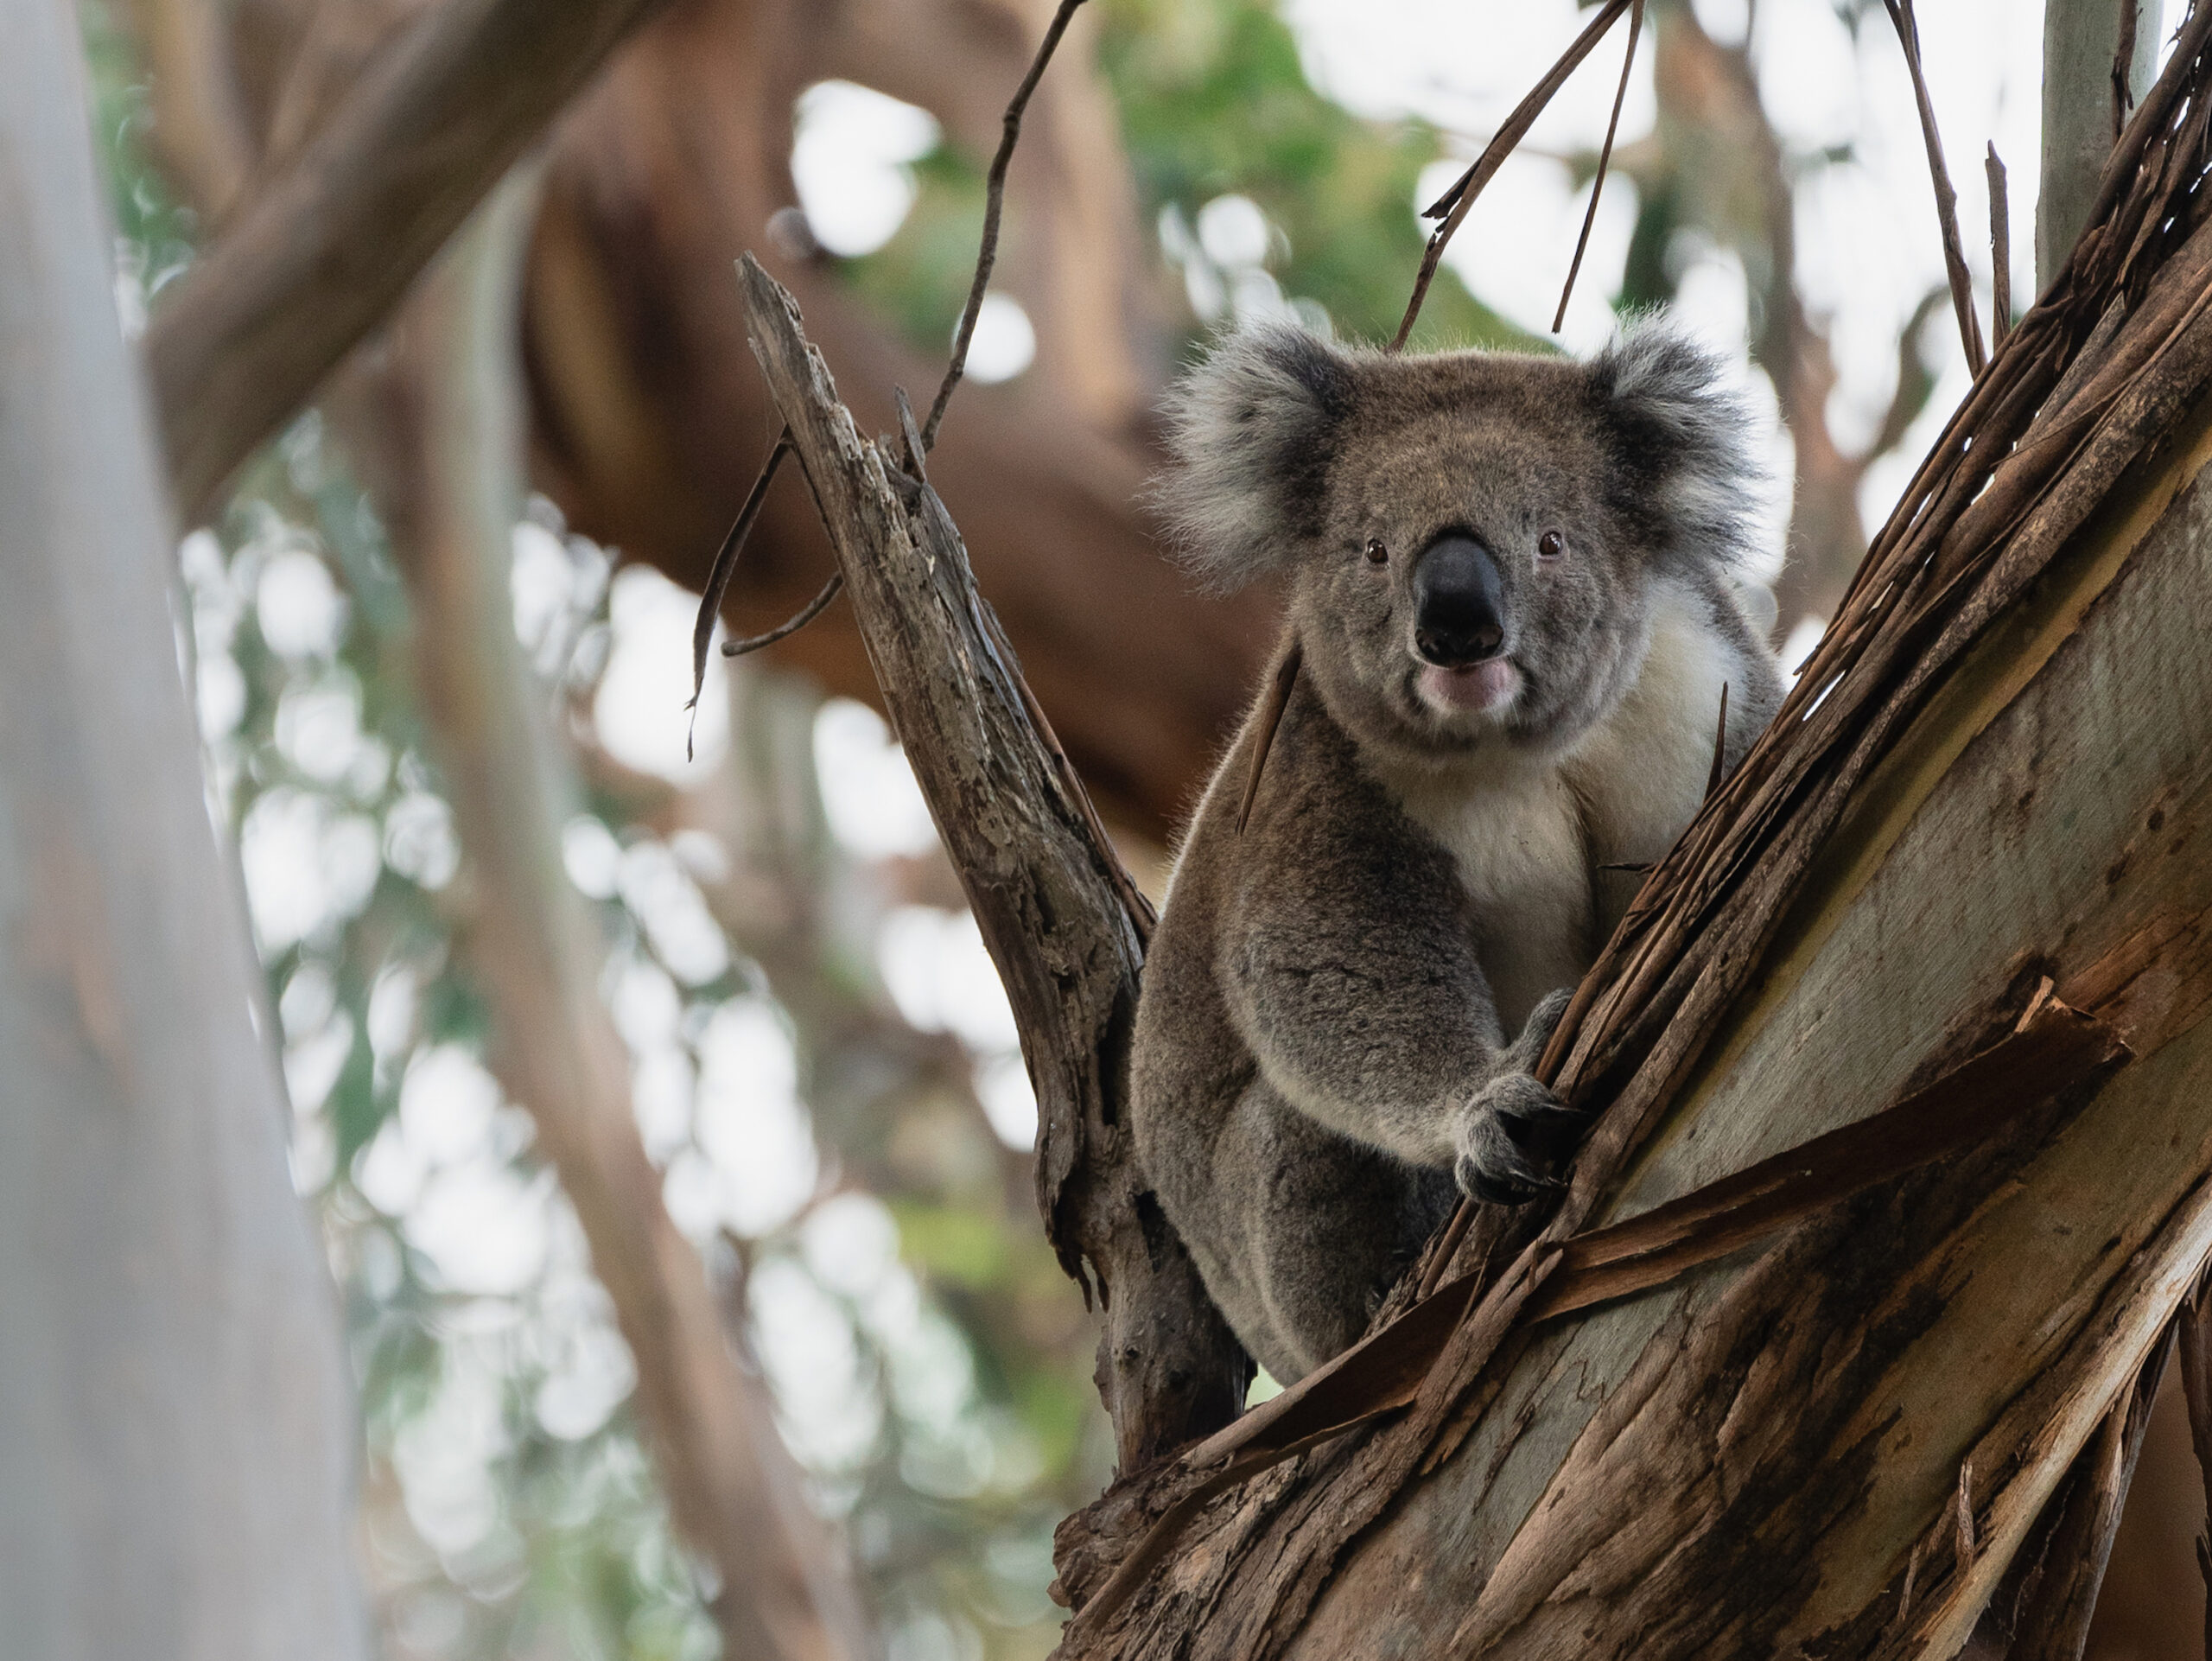 Rescuing Australia's Wildlife One Animal at a Time